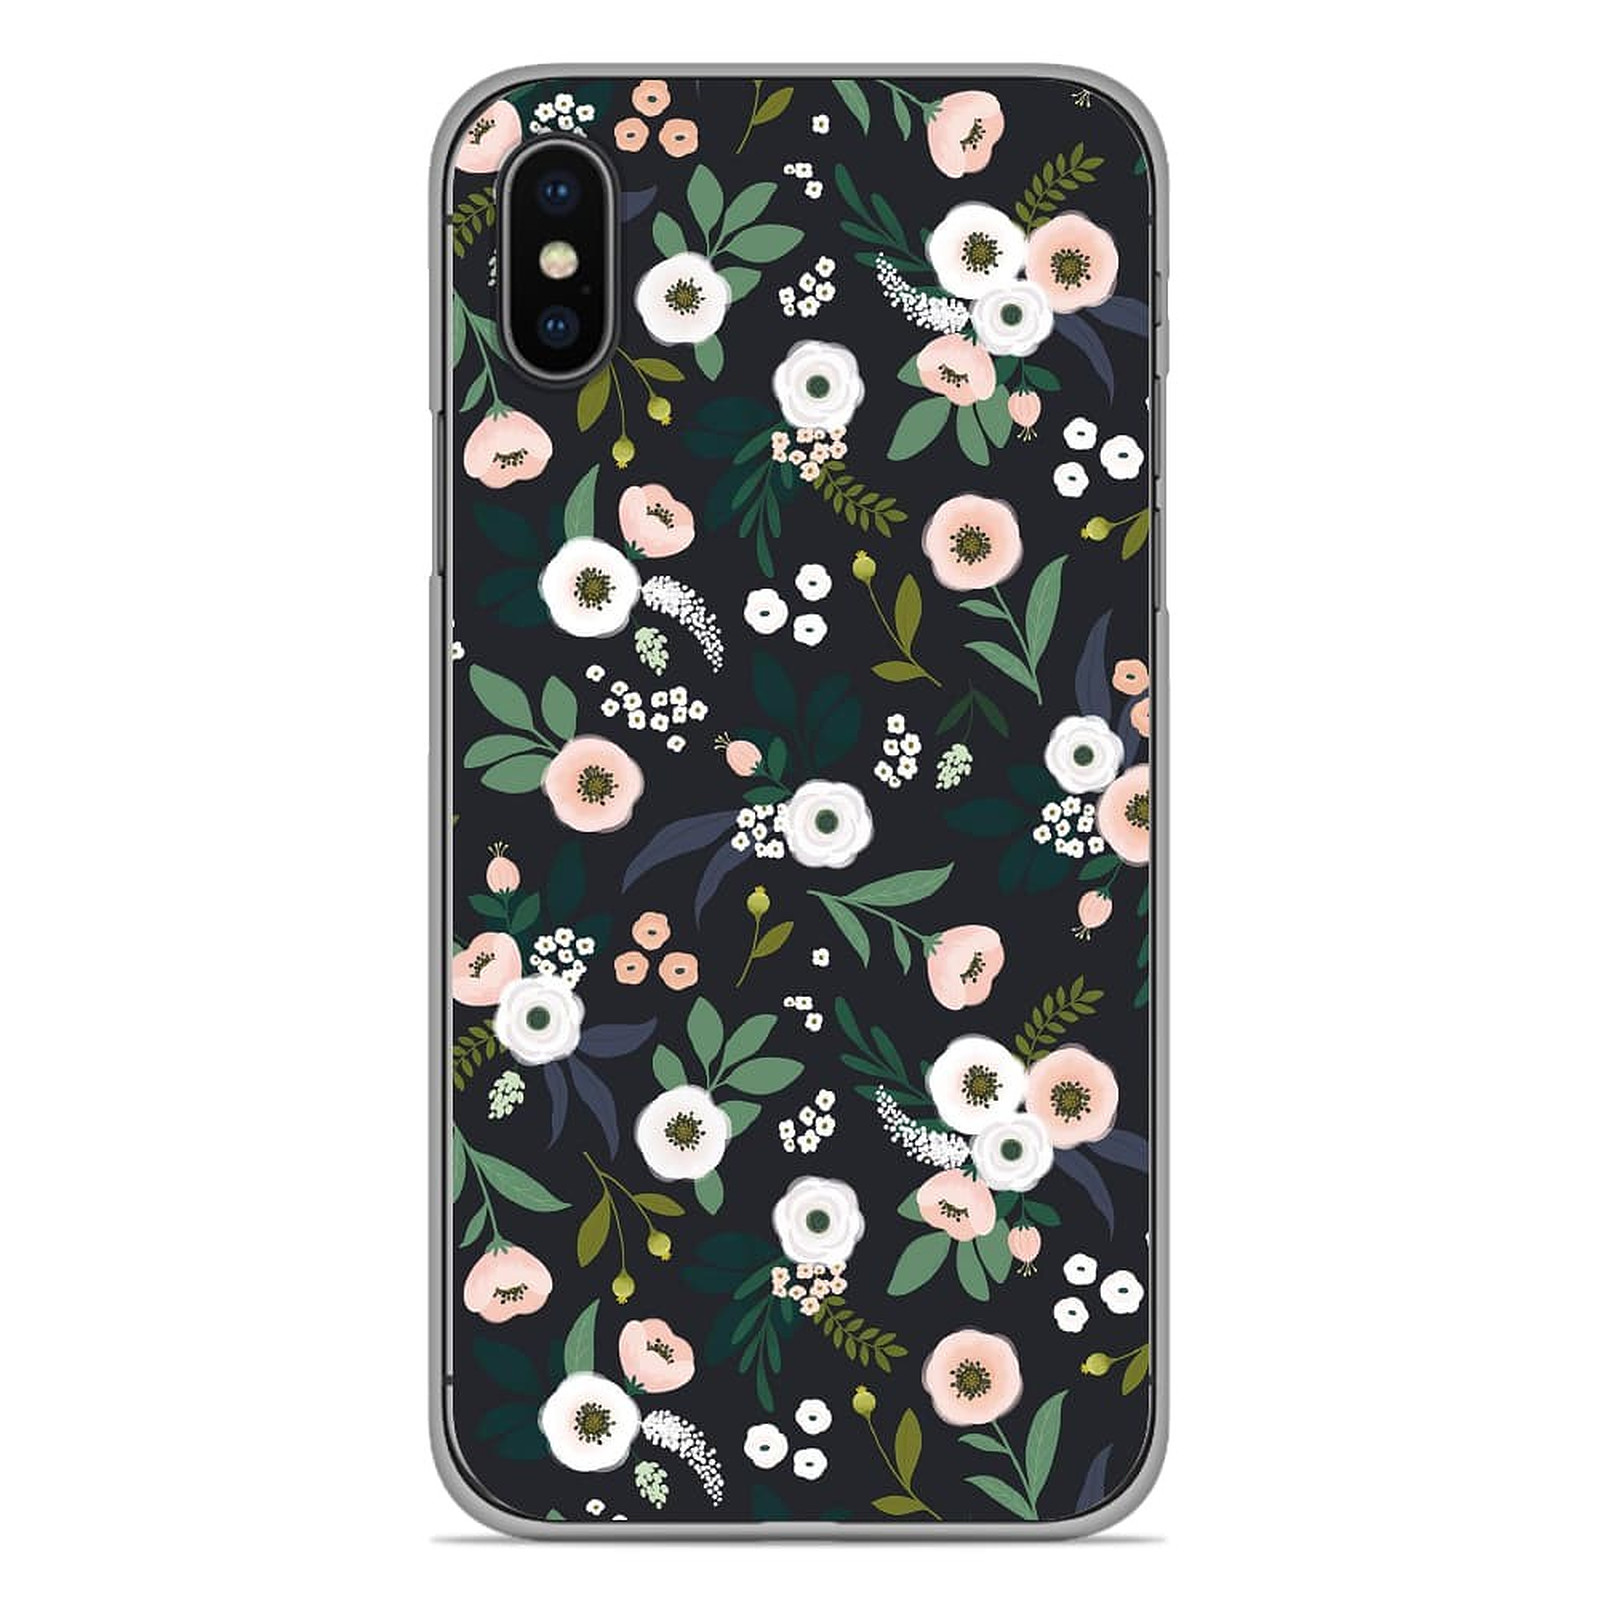 1001 Coques Coque silicone gel Apple iPhone XS Max motif Flowers Noir - Coque telephone 1001Coques